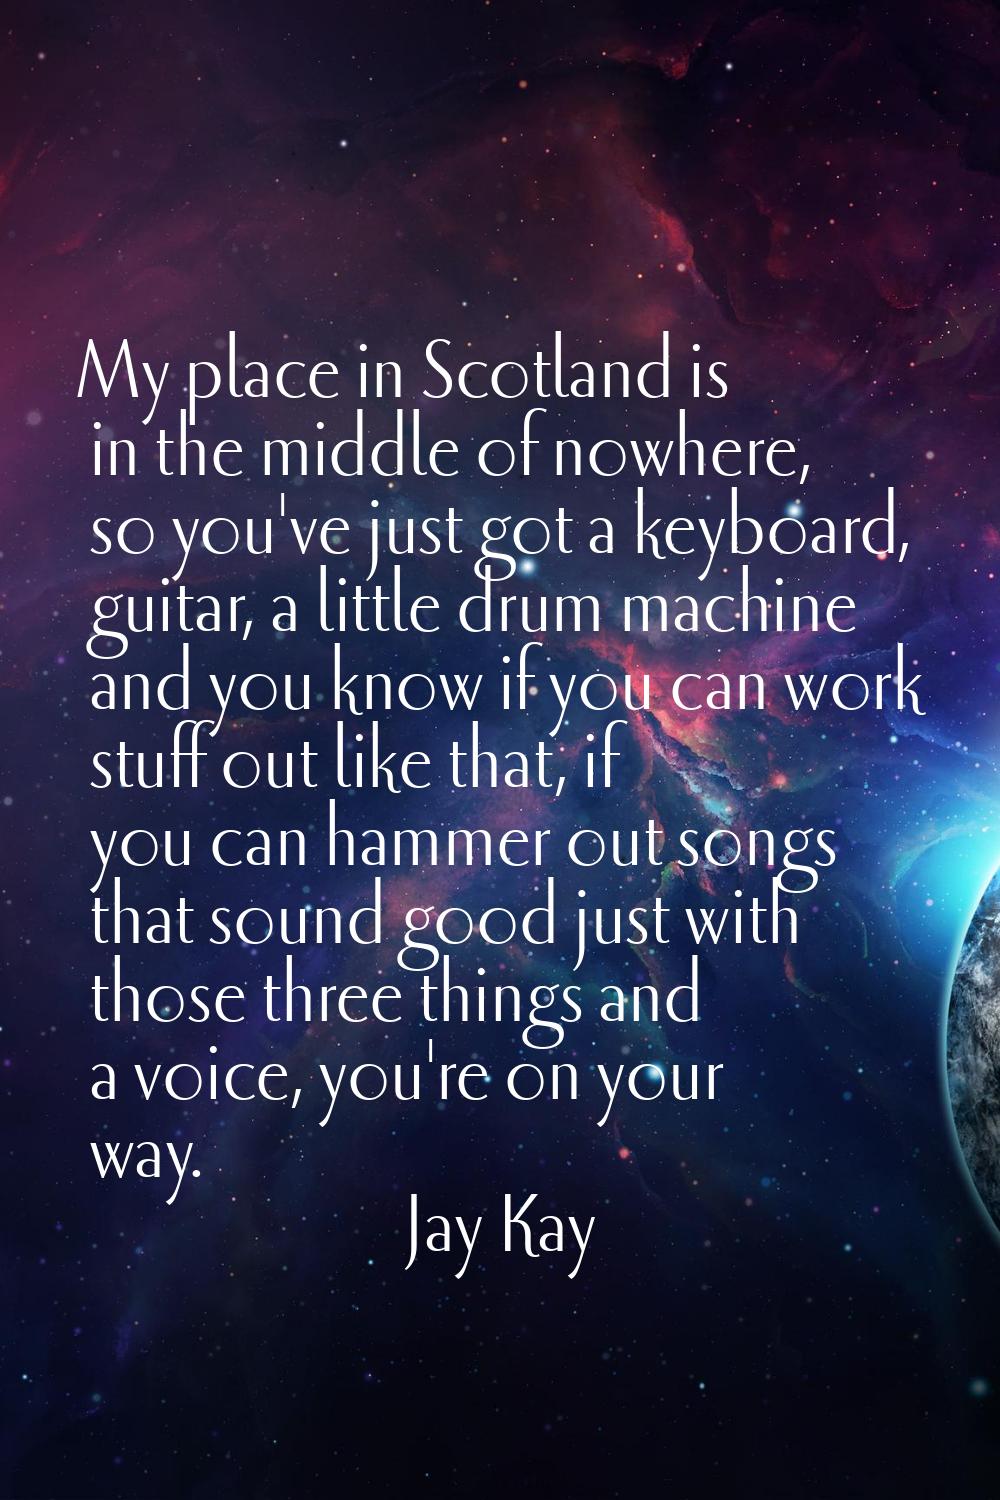 My place in Scotland is in the middle of nowhere, so you've just got a keyboard, guitar, a little d